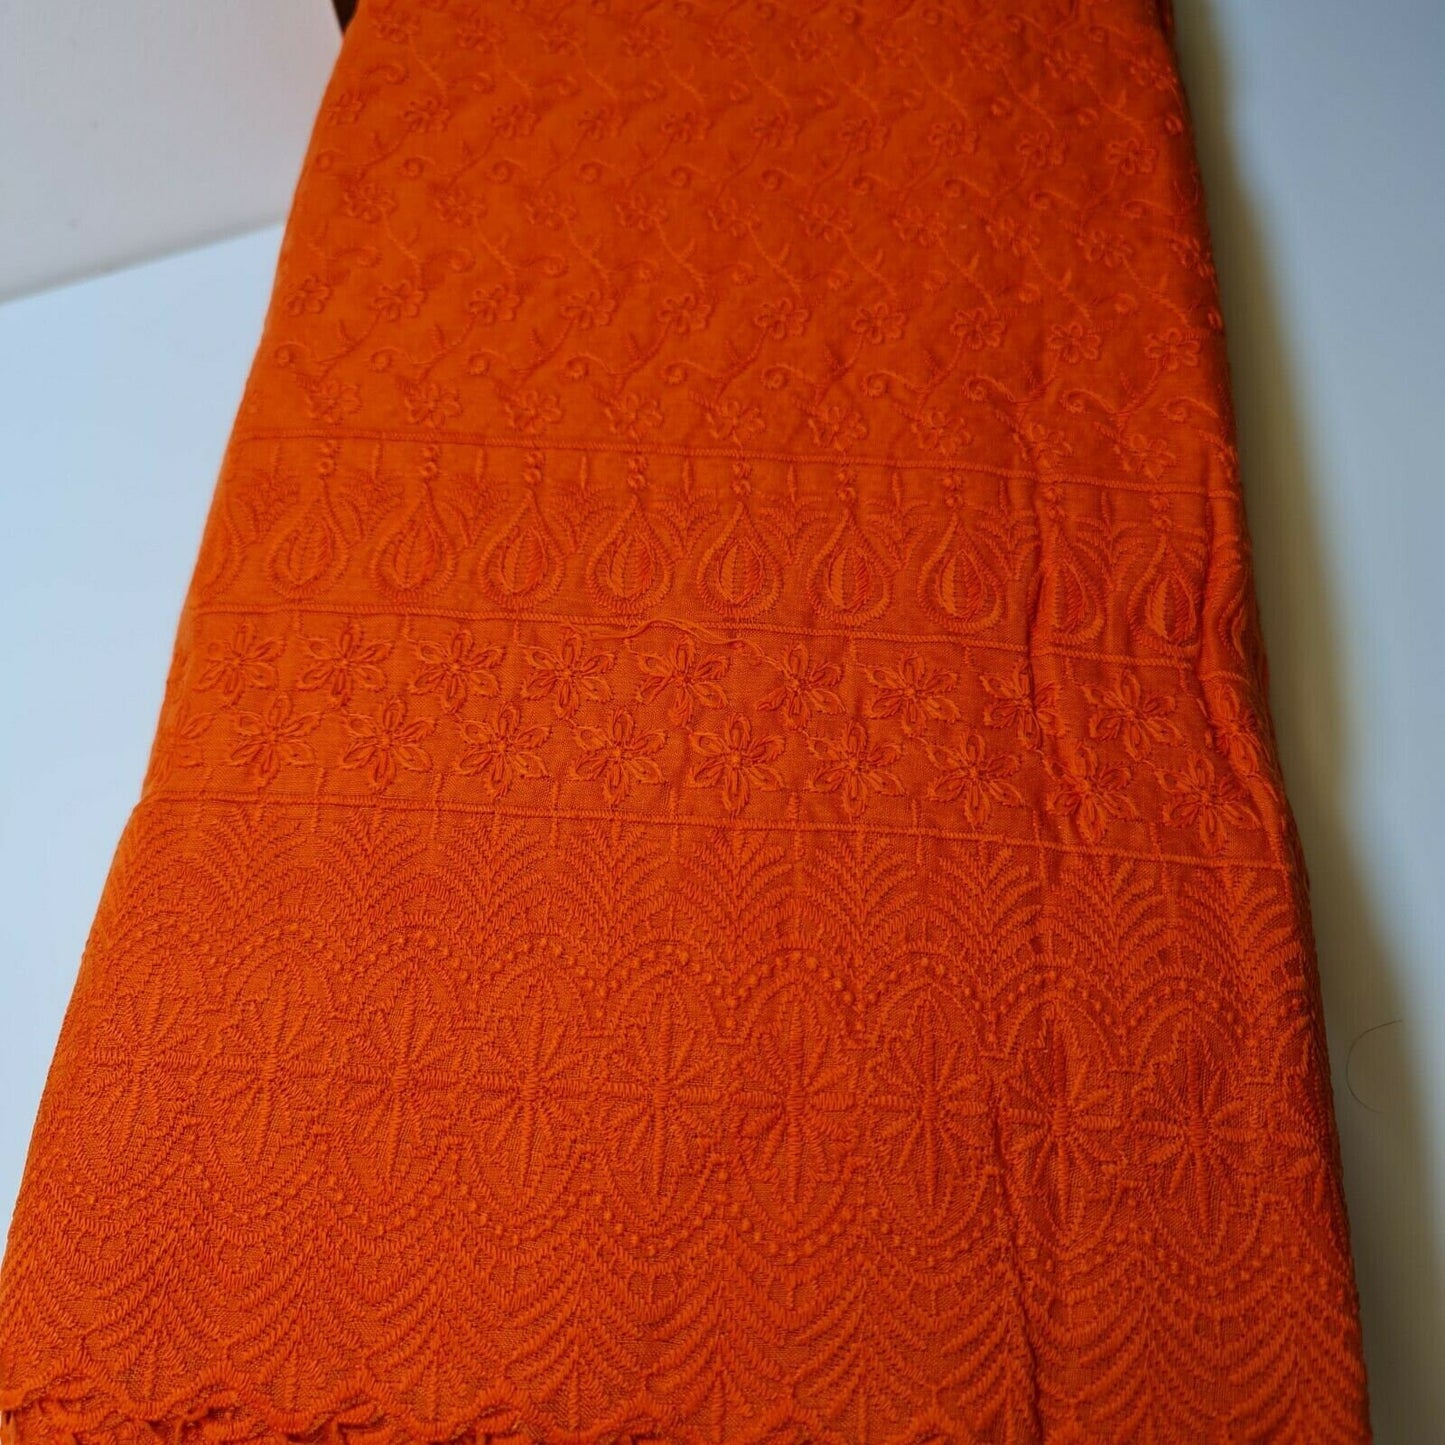 NEW SPRING 100% Cotton Lawn Broderie Anglaise Embroidery Dress Craft Fabric 44" (Orange)